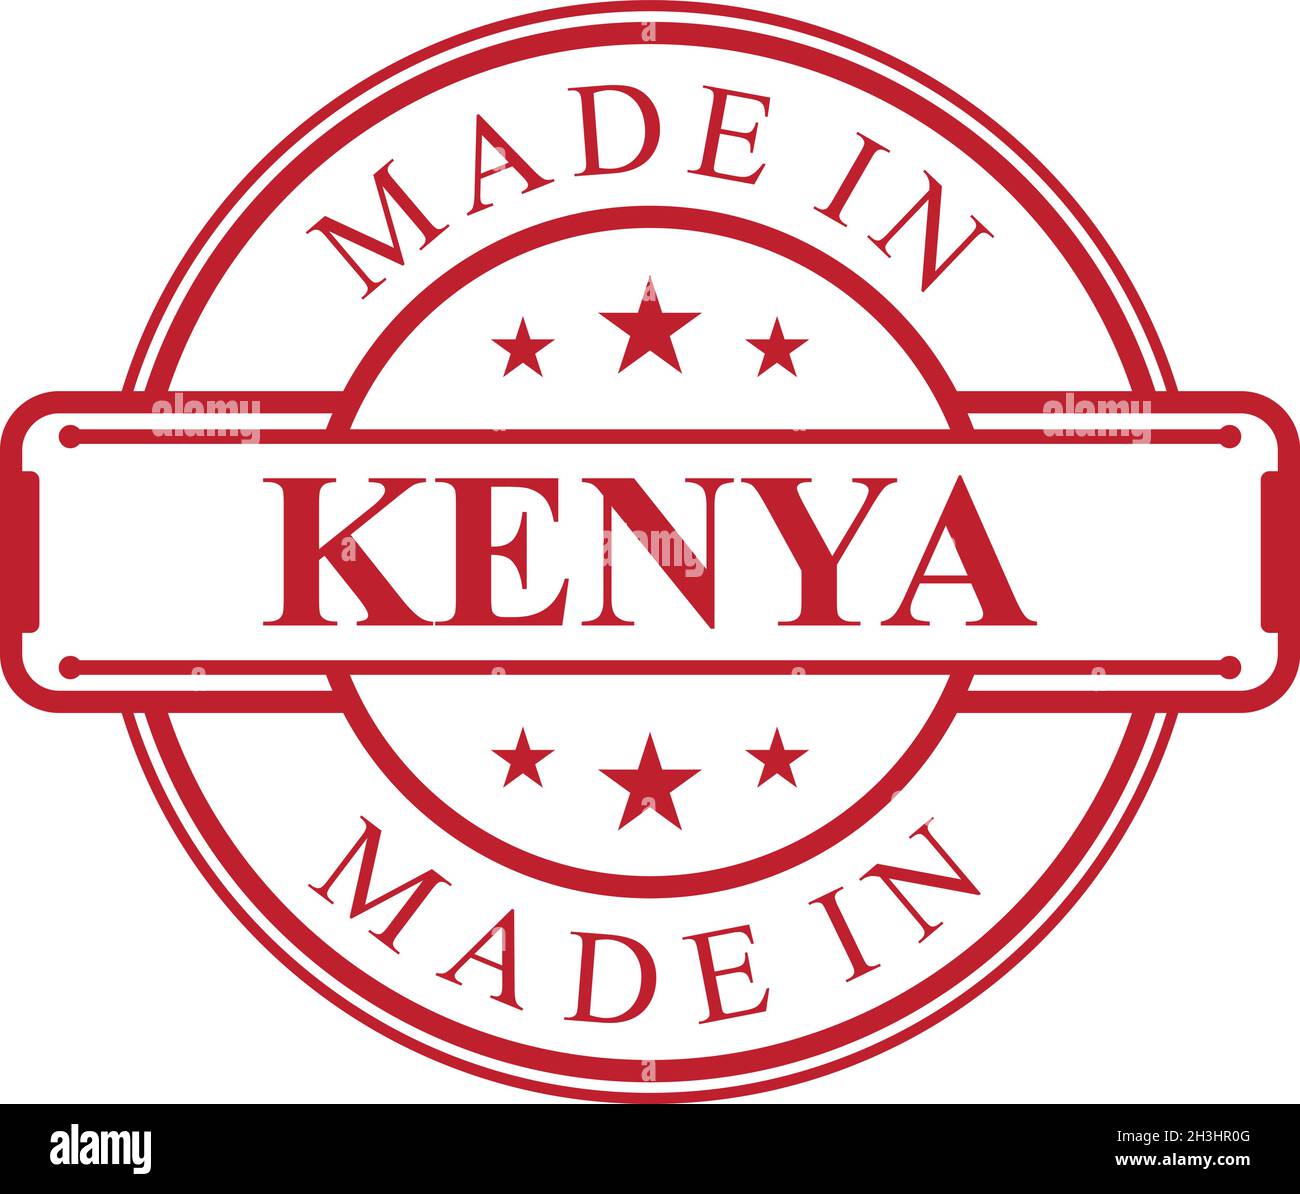 Made in Kenya label icon with red color emblem on the white background. Vector quality logo emblem design element. Vector illustration EPS.8 EPS.10 Stock Vector